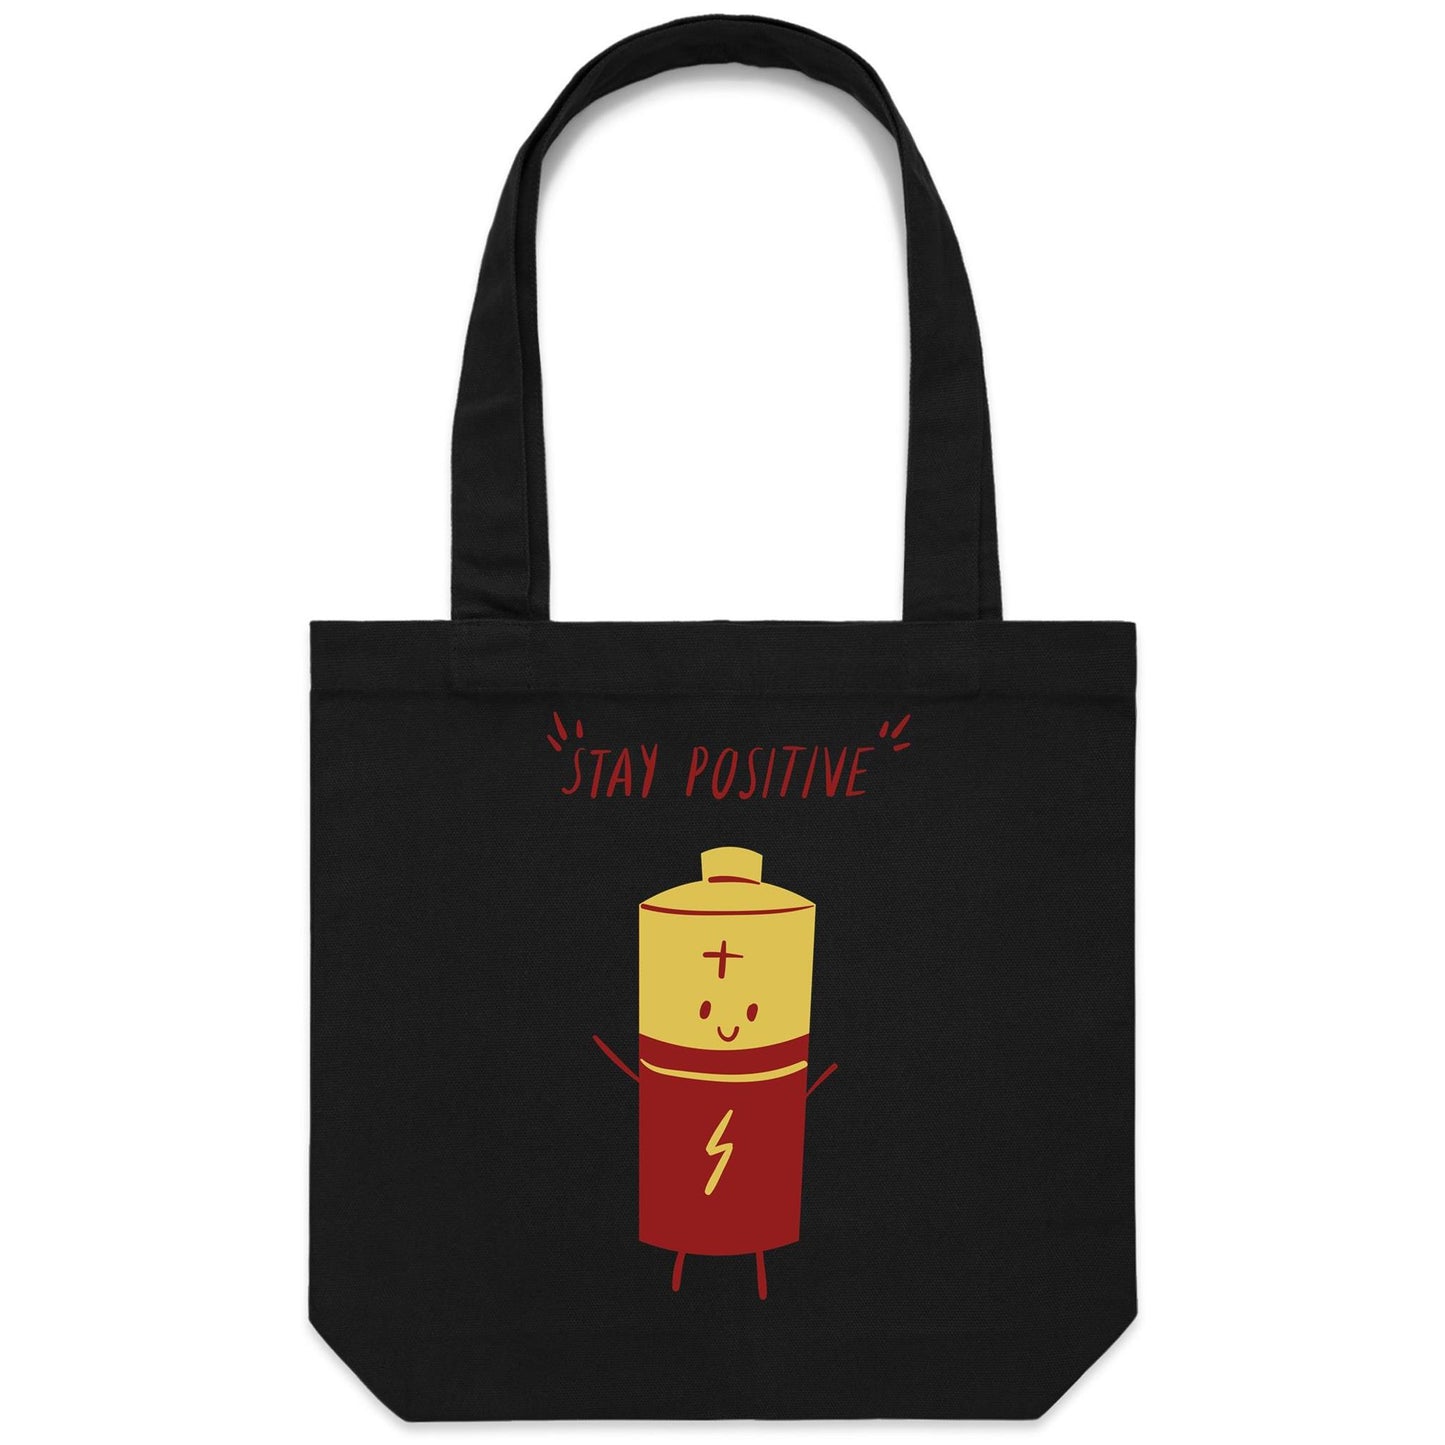 Stay Positive - Canvas Tote Bag Black One-Size Tote Bag Funny